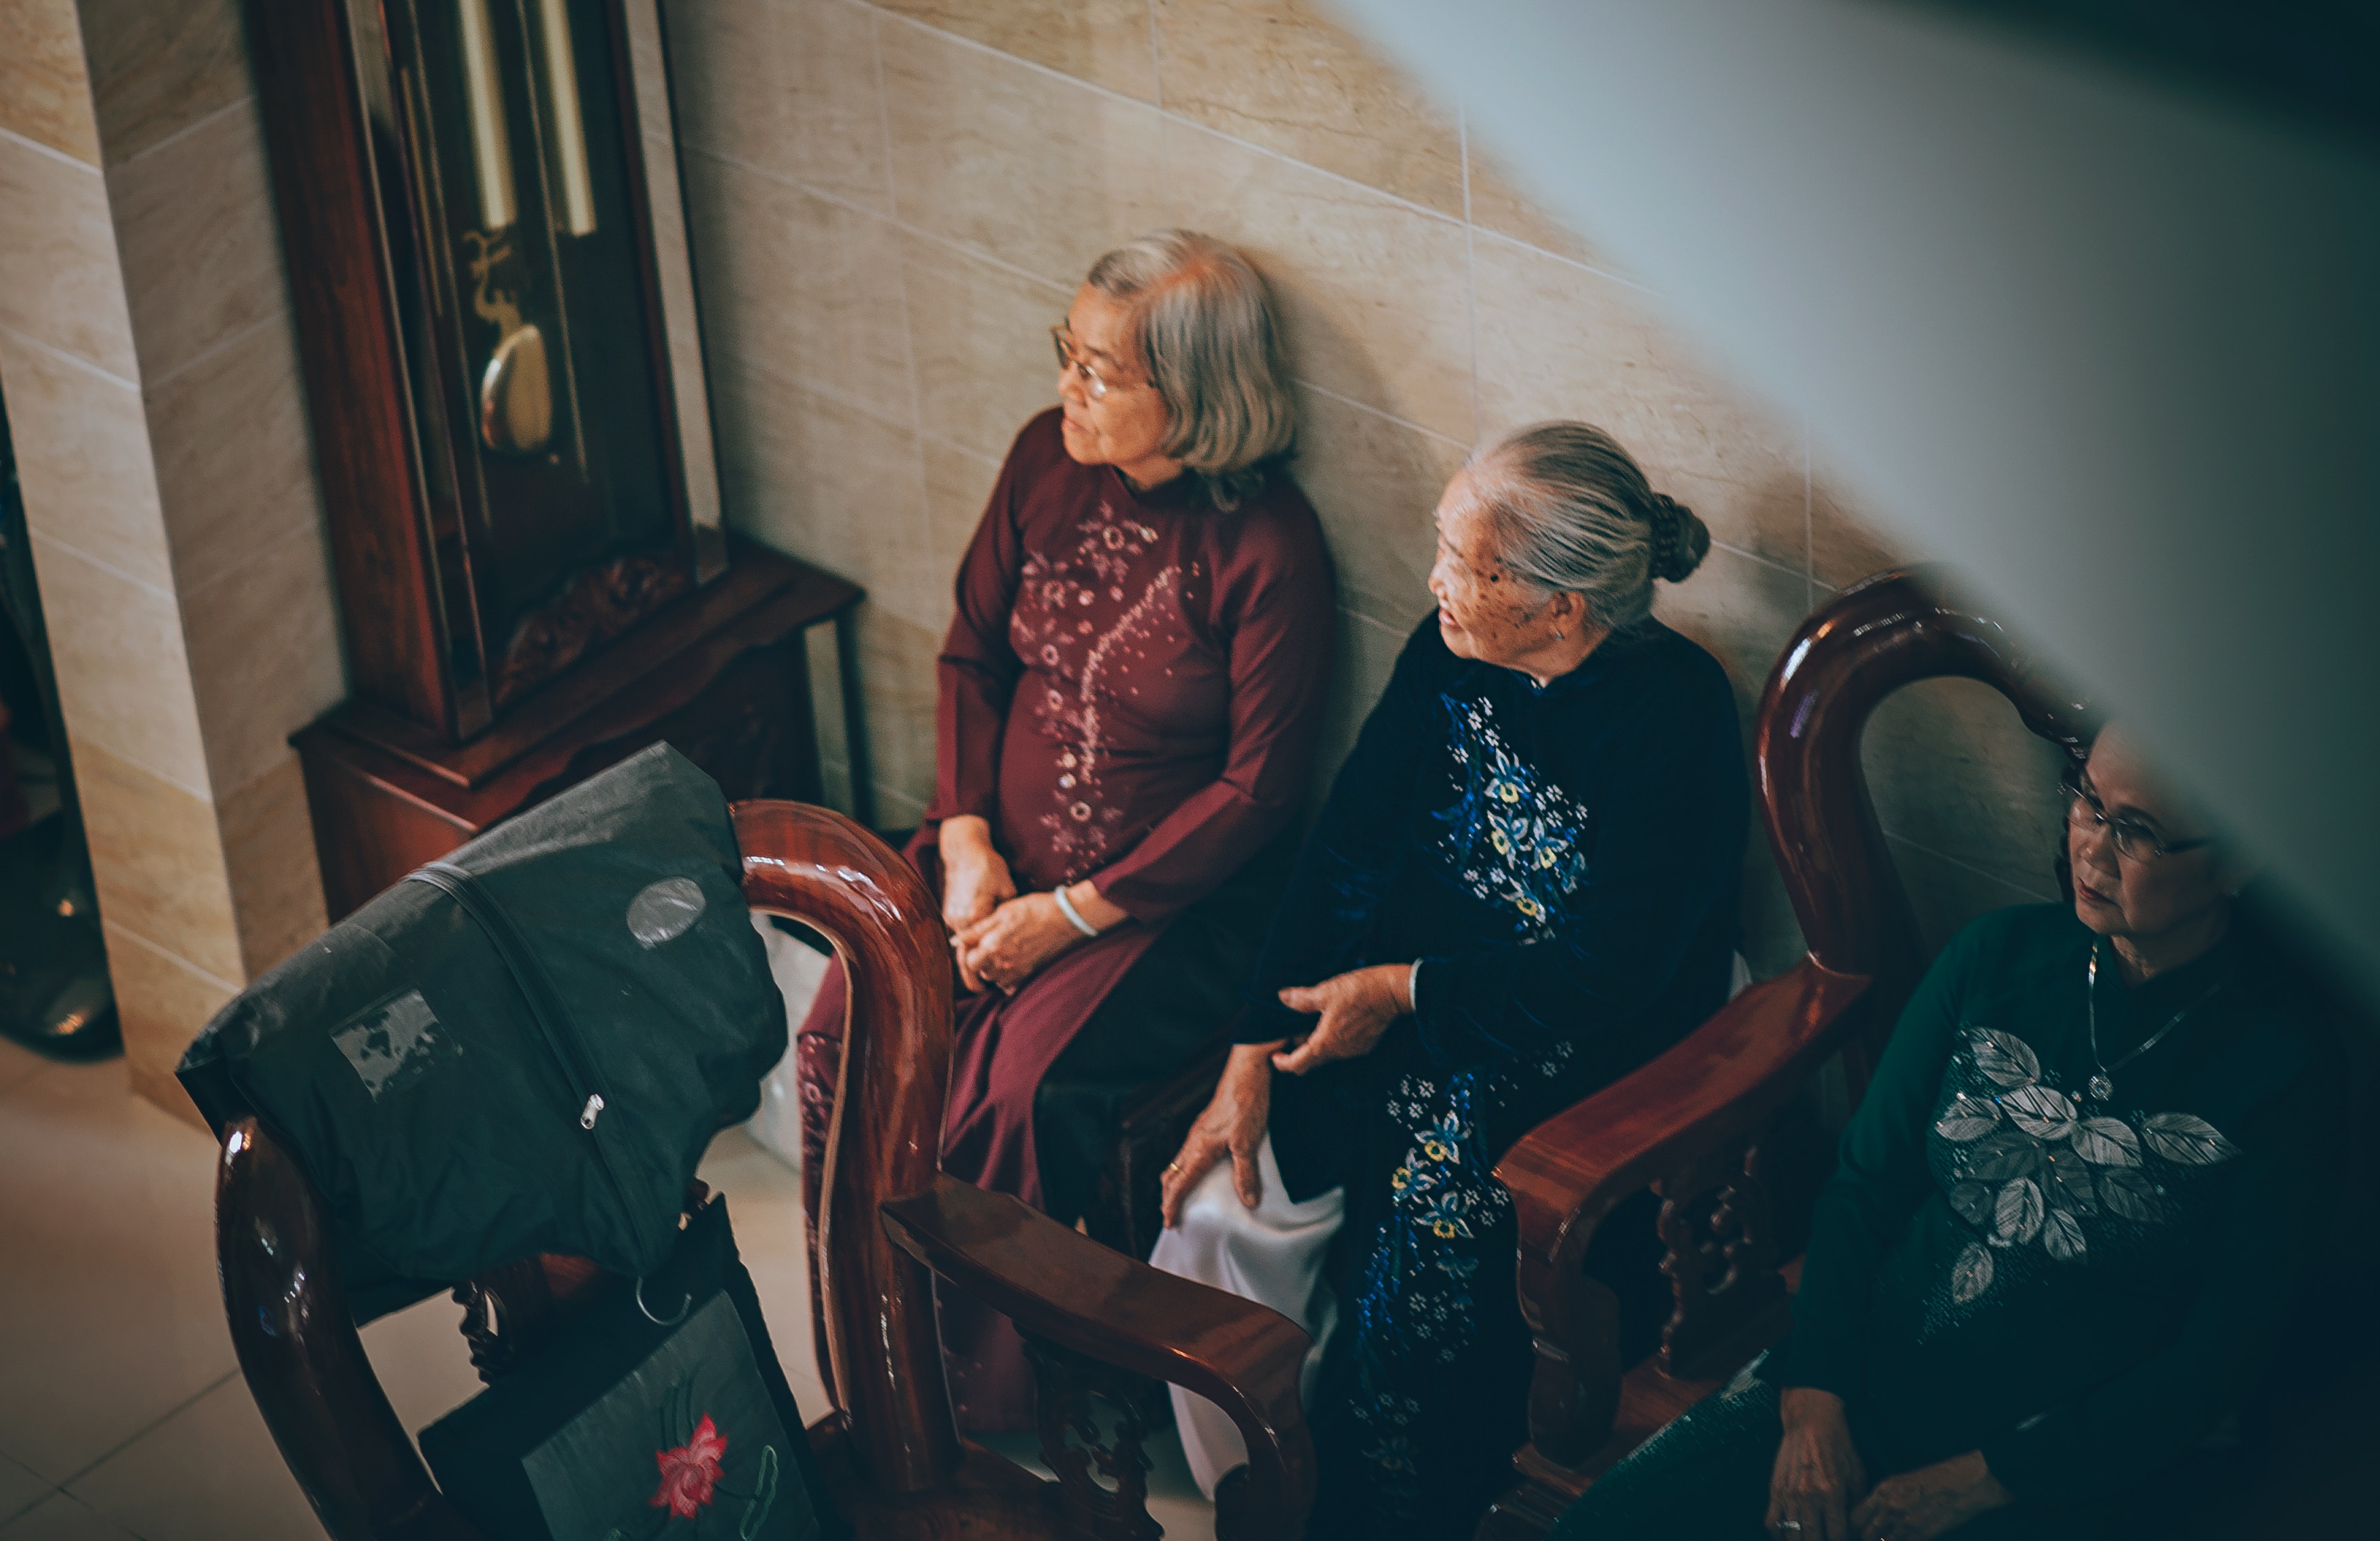 Photography of Three Old Women Sitting on Chair, Adult, Room, Wooden, Women, HQ Photo. 